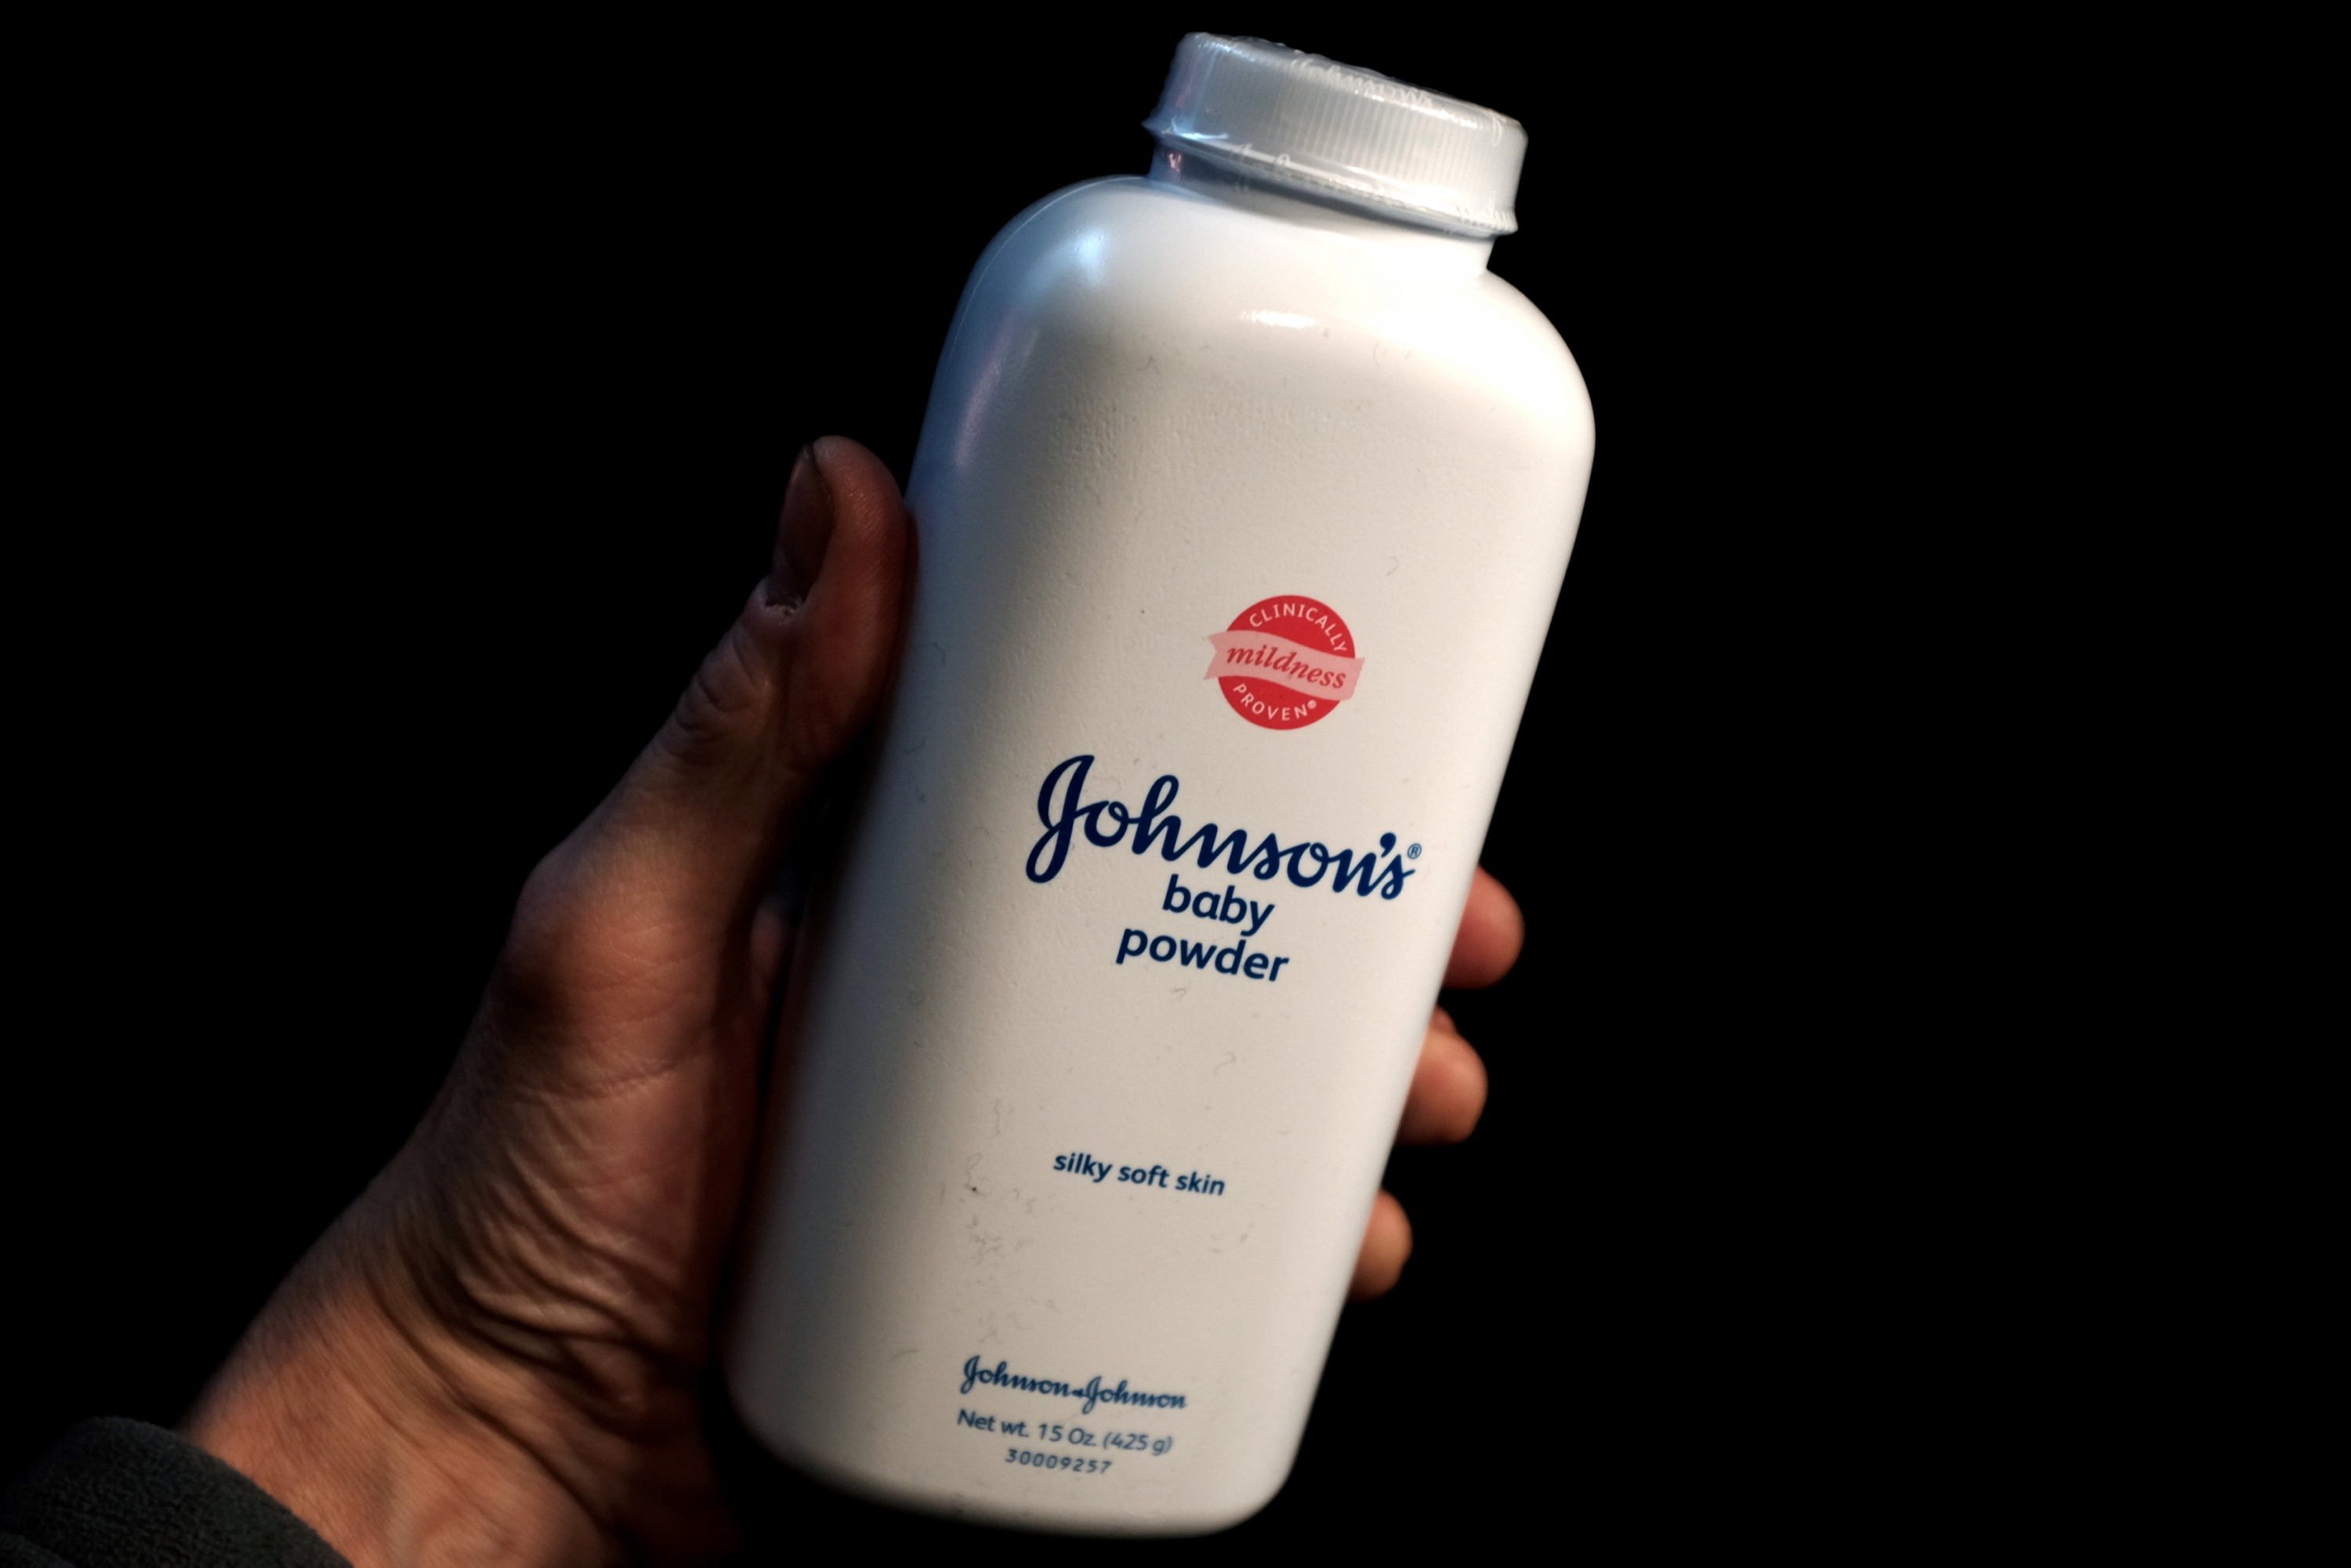 FILE PHOTO: A bottle of Johnson and Johnson Baby Powder is seen in a photo illustration taken in New York, February 24, 2016. REUTERS/Mike Segar/Illustration